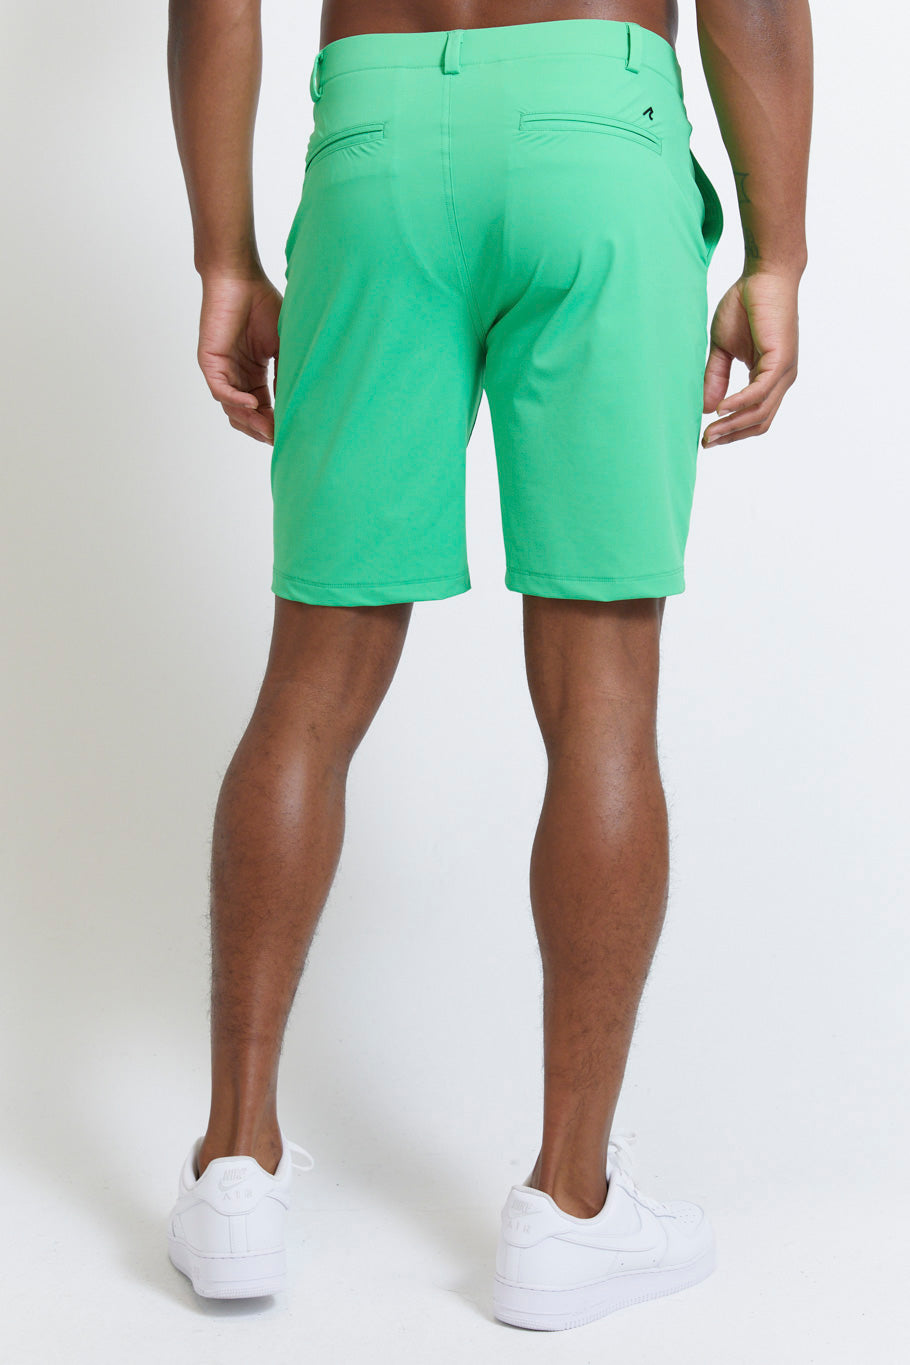 Image of the hanover pull-on short in glade